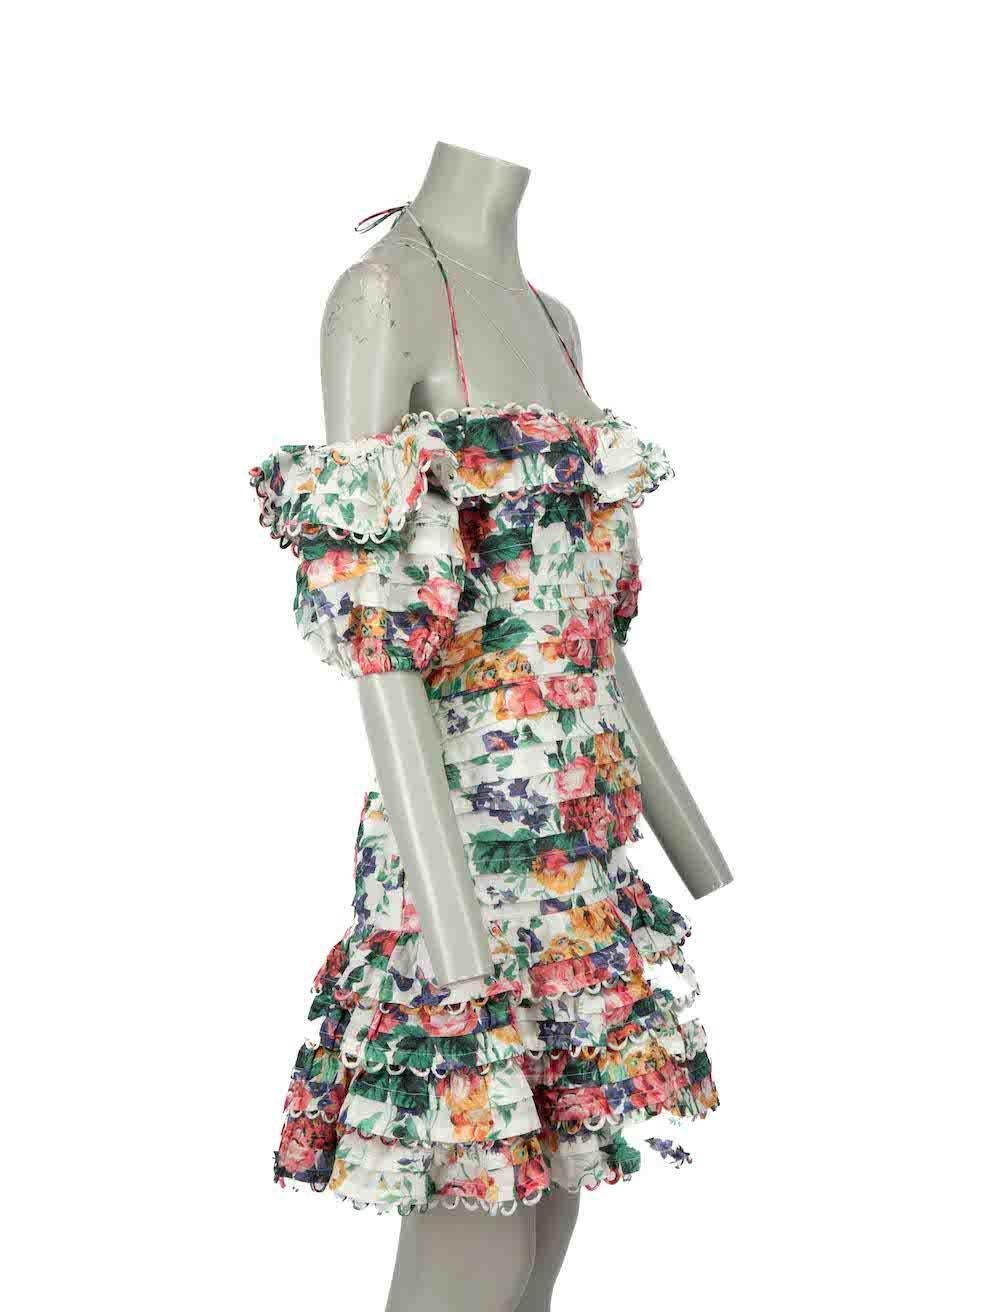 CONDITION is Very good. Hardly any visible wear to dress is evident on this used Zimmermann designer resale item.

Details
Multicolour
Linen
Mini dress
Floral print pattern
Off the shoulder
Ruffles detail
Elasticated on sleeves
Tie strap on